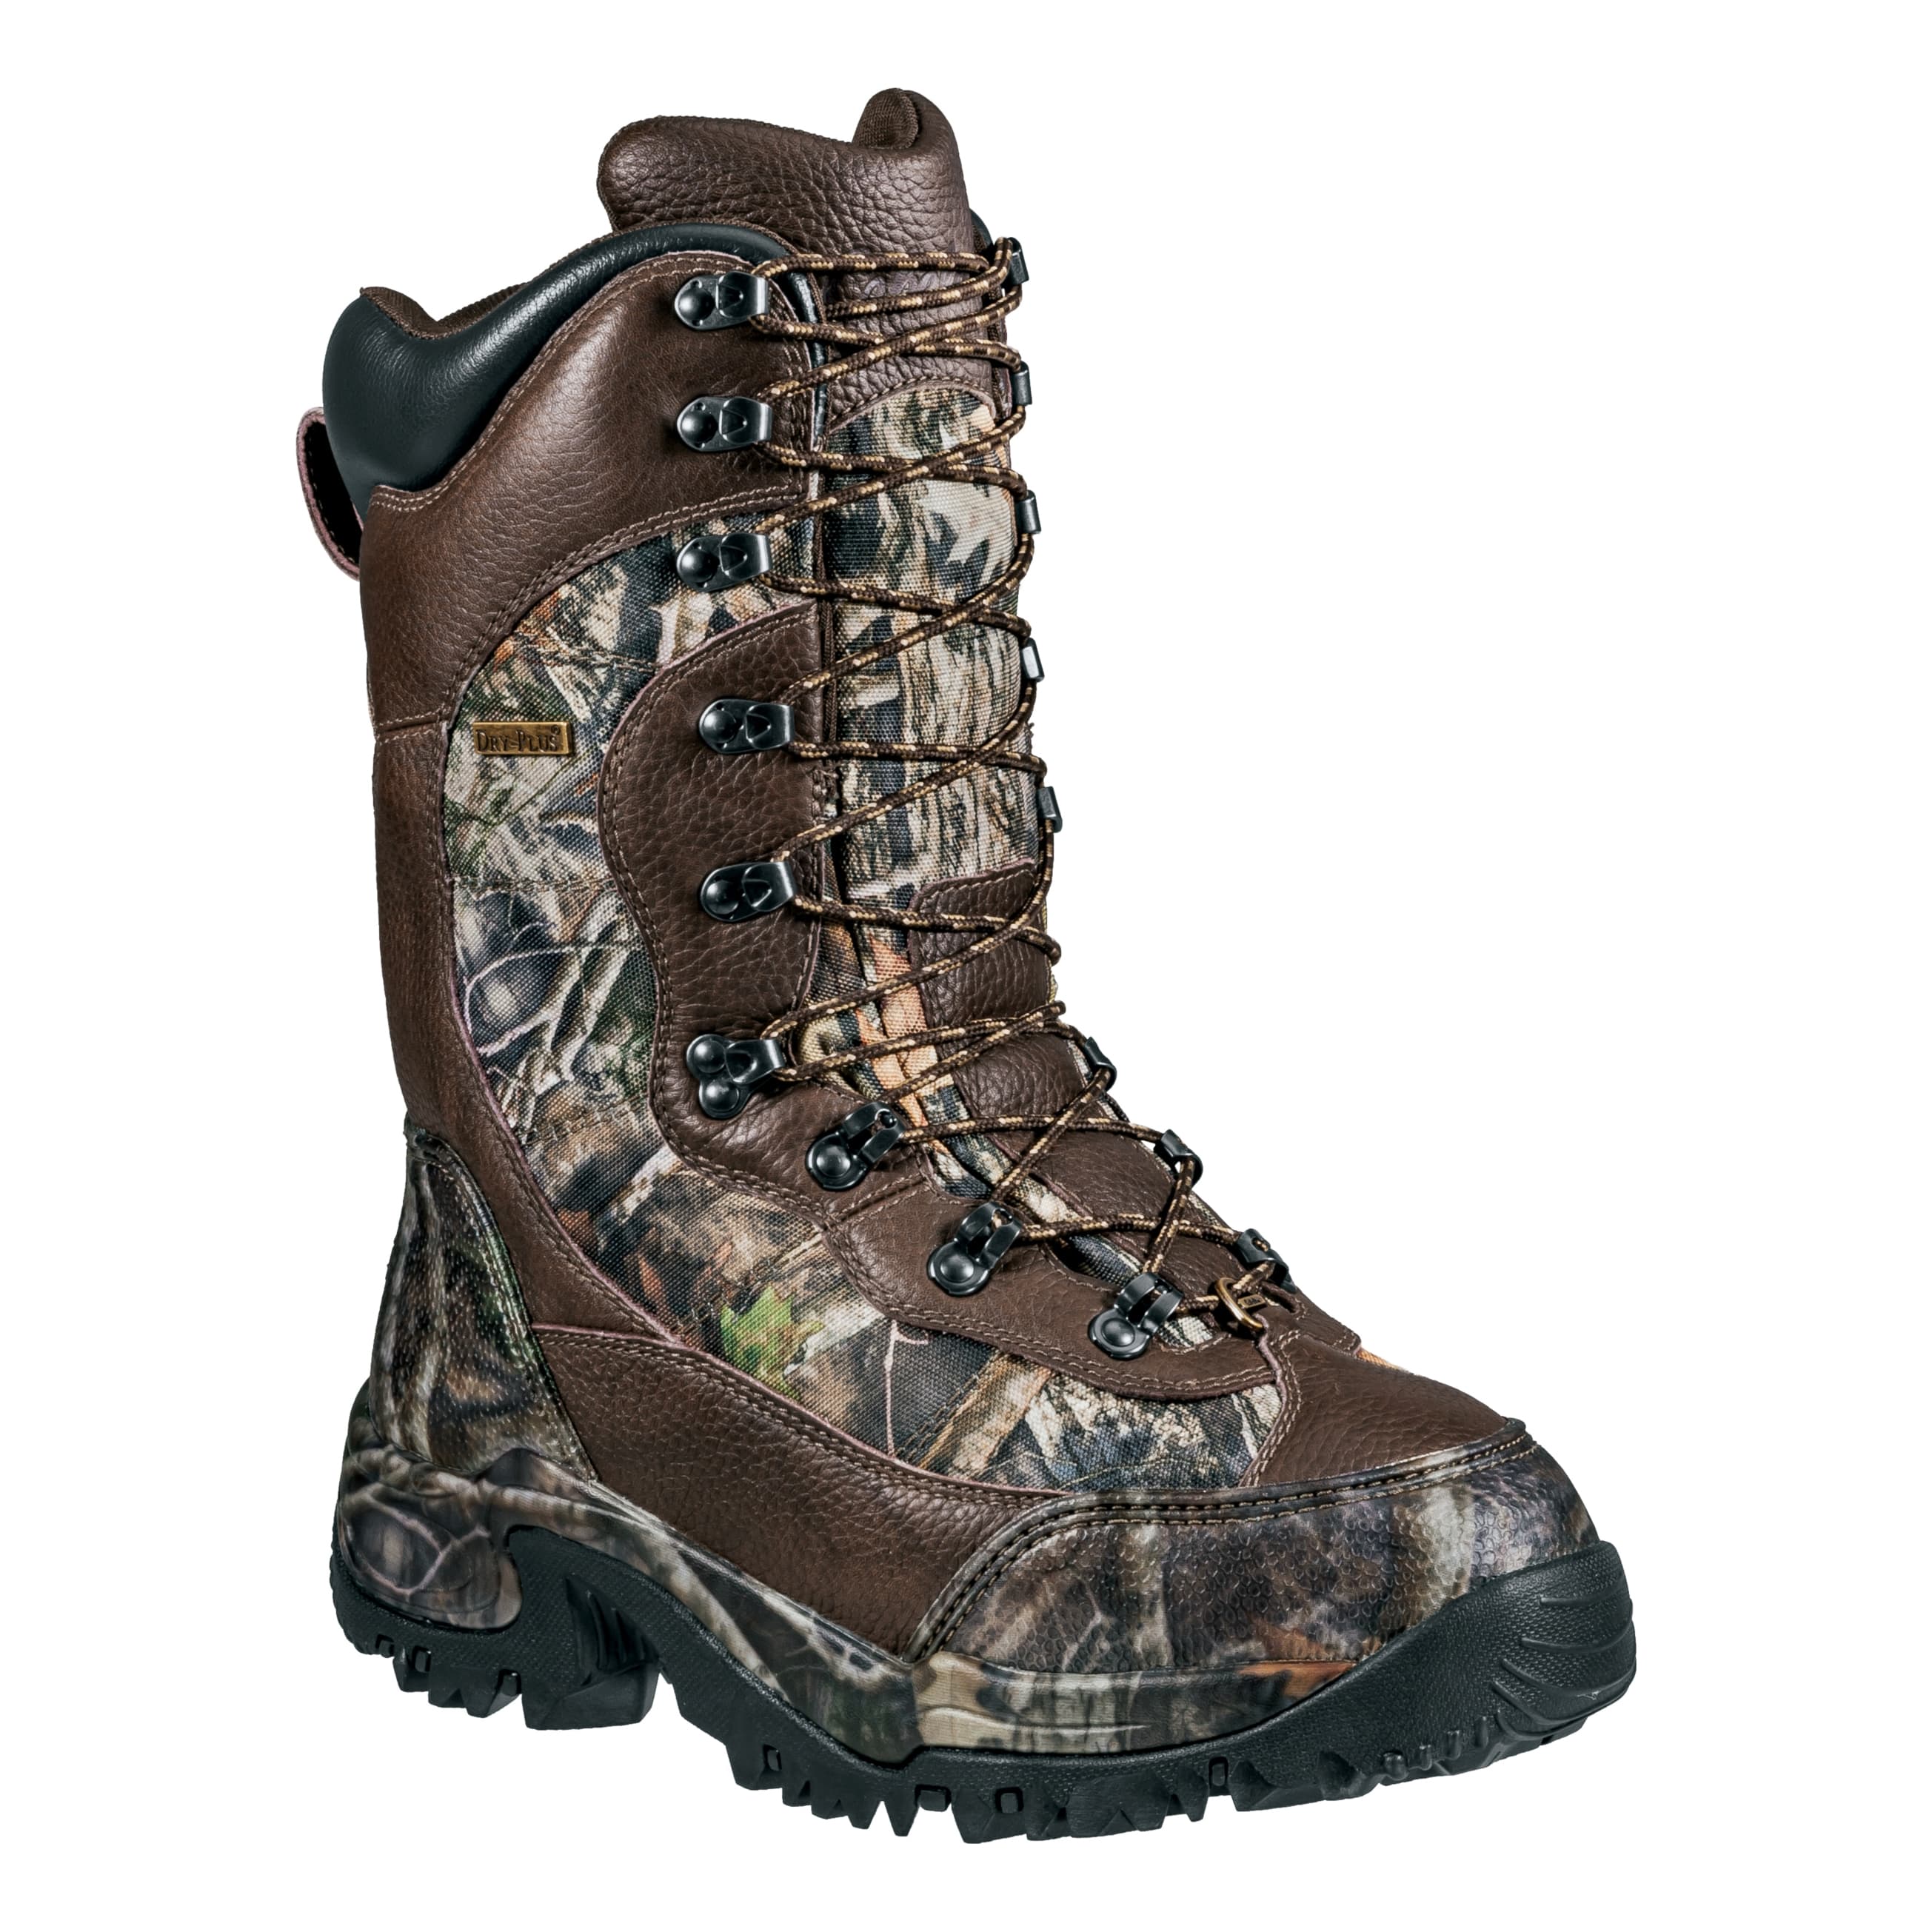 Cabela's Inferno 2000g Insulated Waterproof Hunting Boots for Men size ...